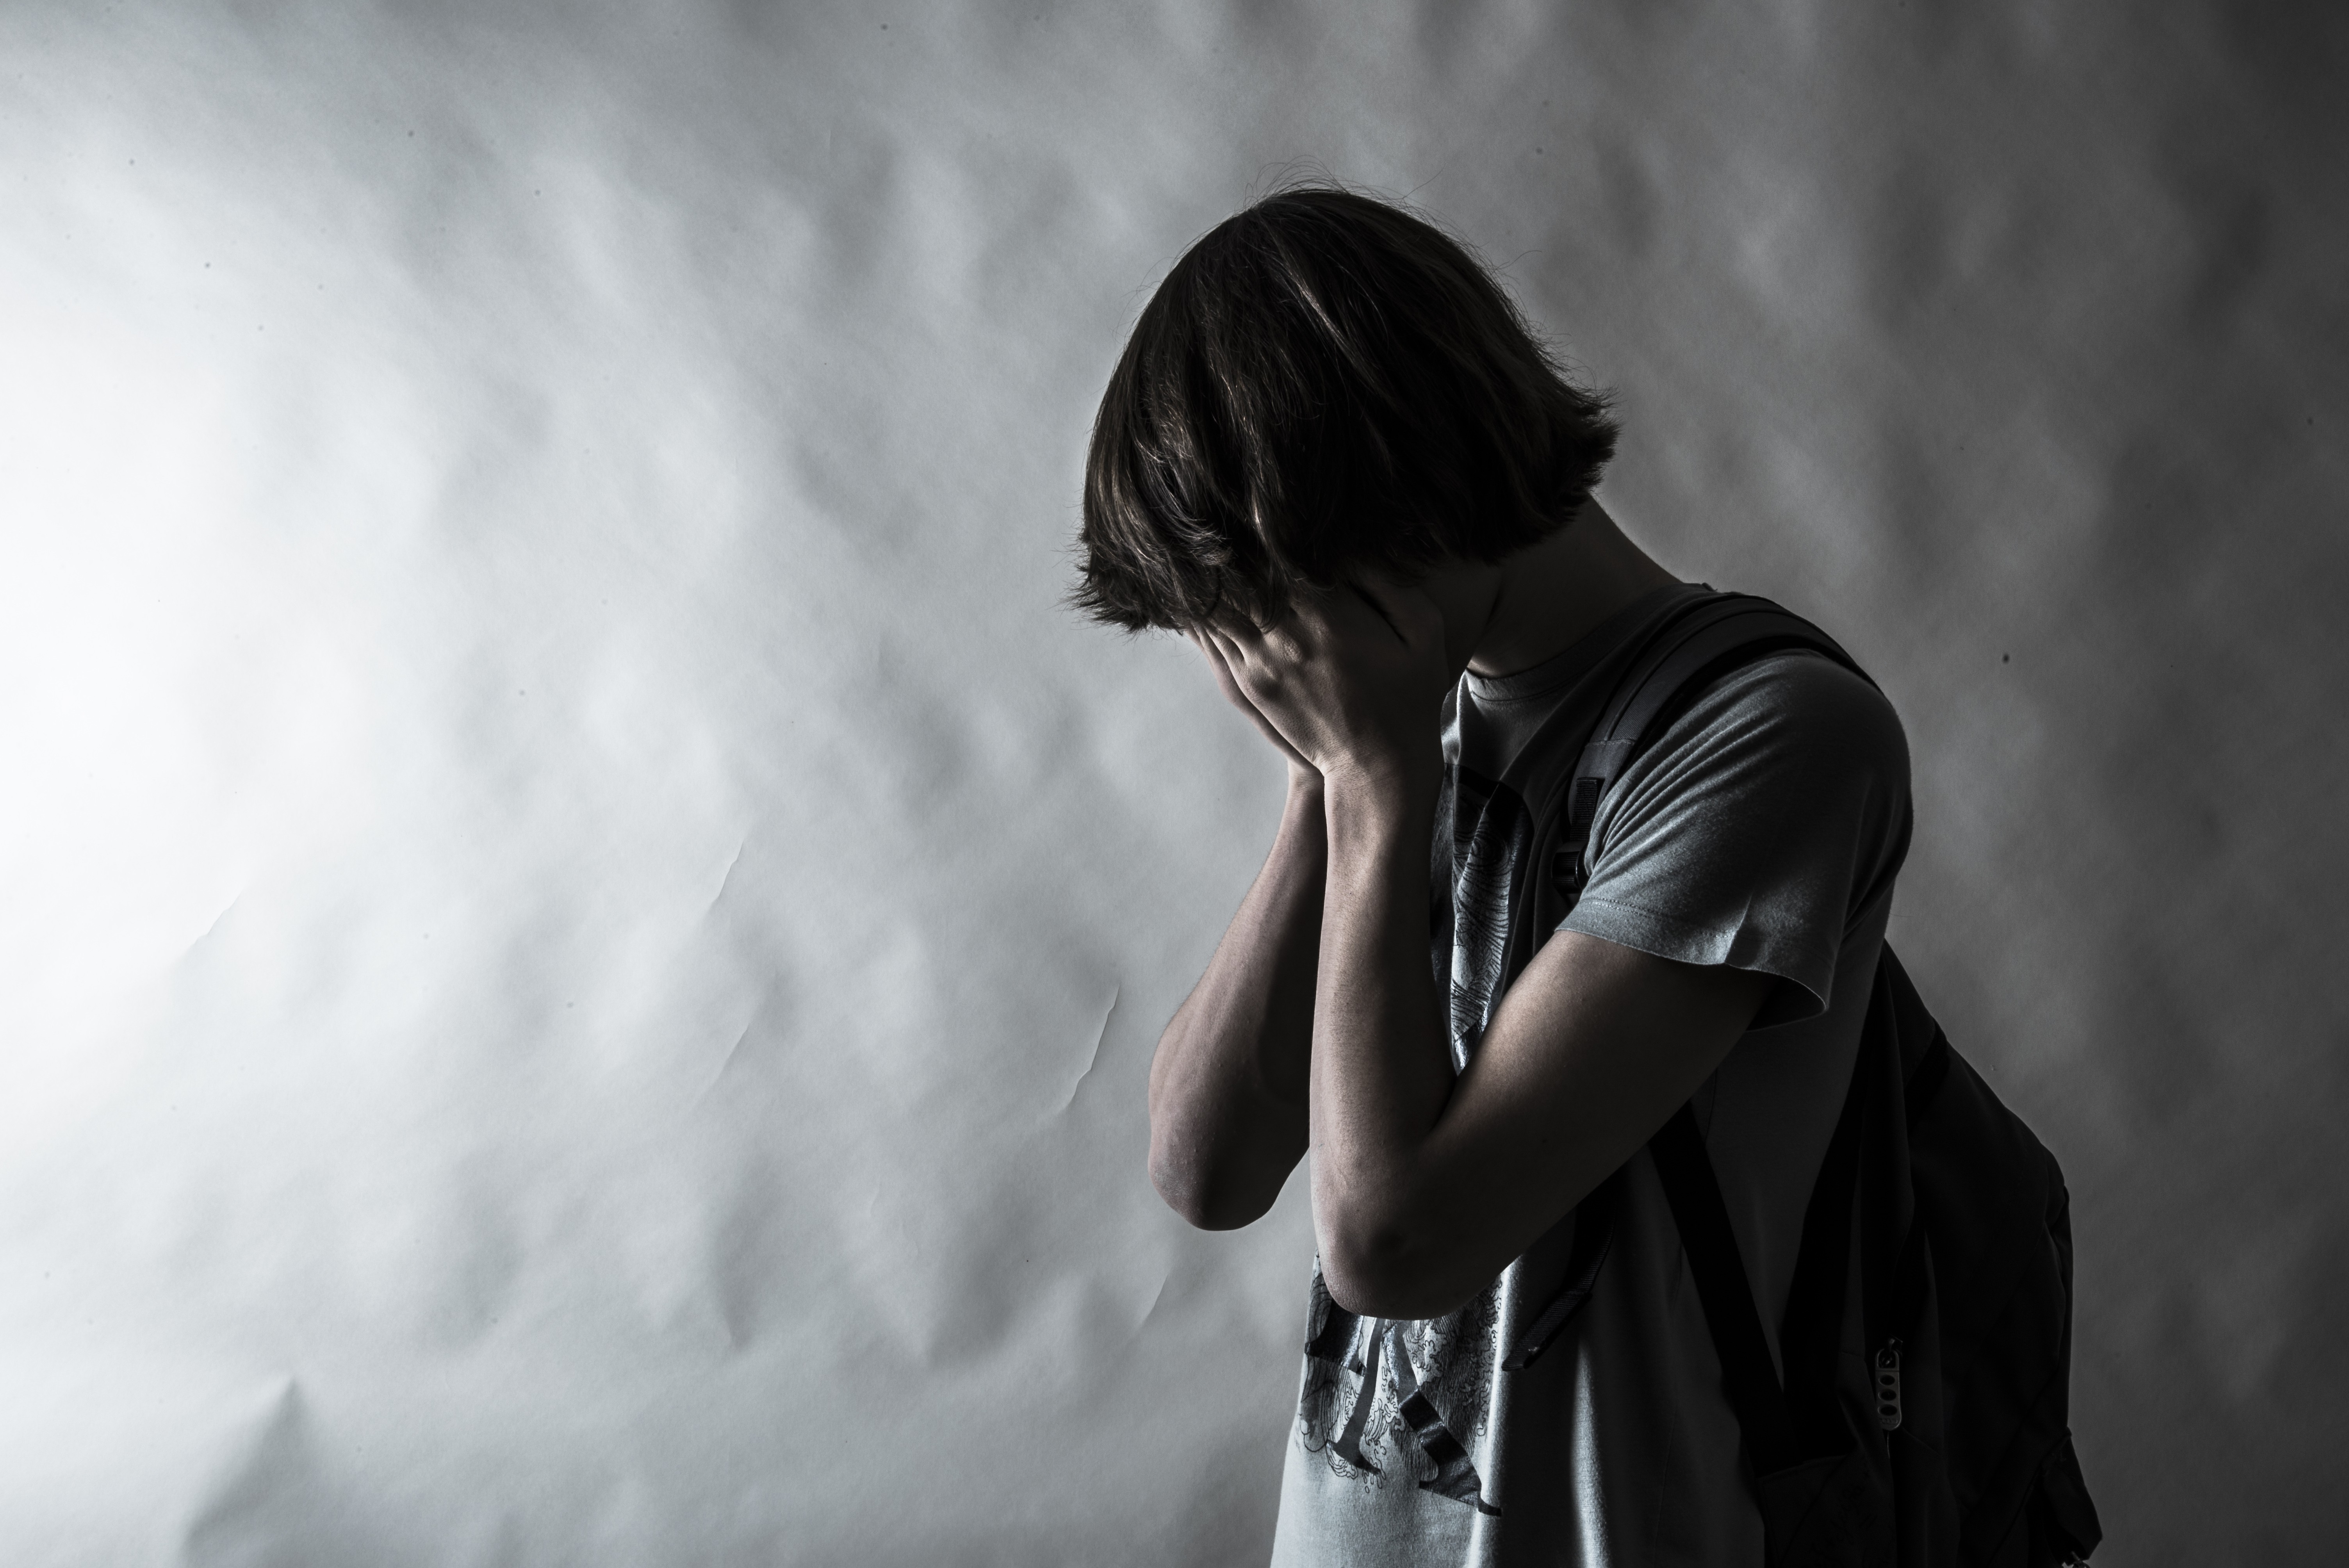 Young people with mental health disorders, in particular, struggle with the expectations of parents with high standards. Photo: Shutterstock